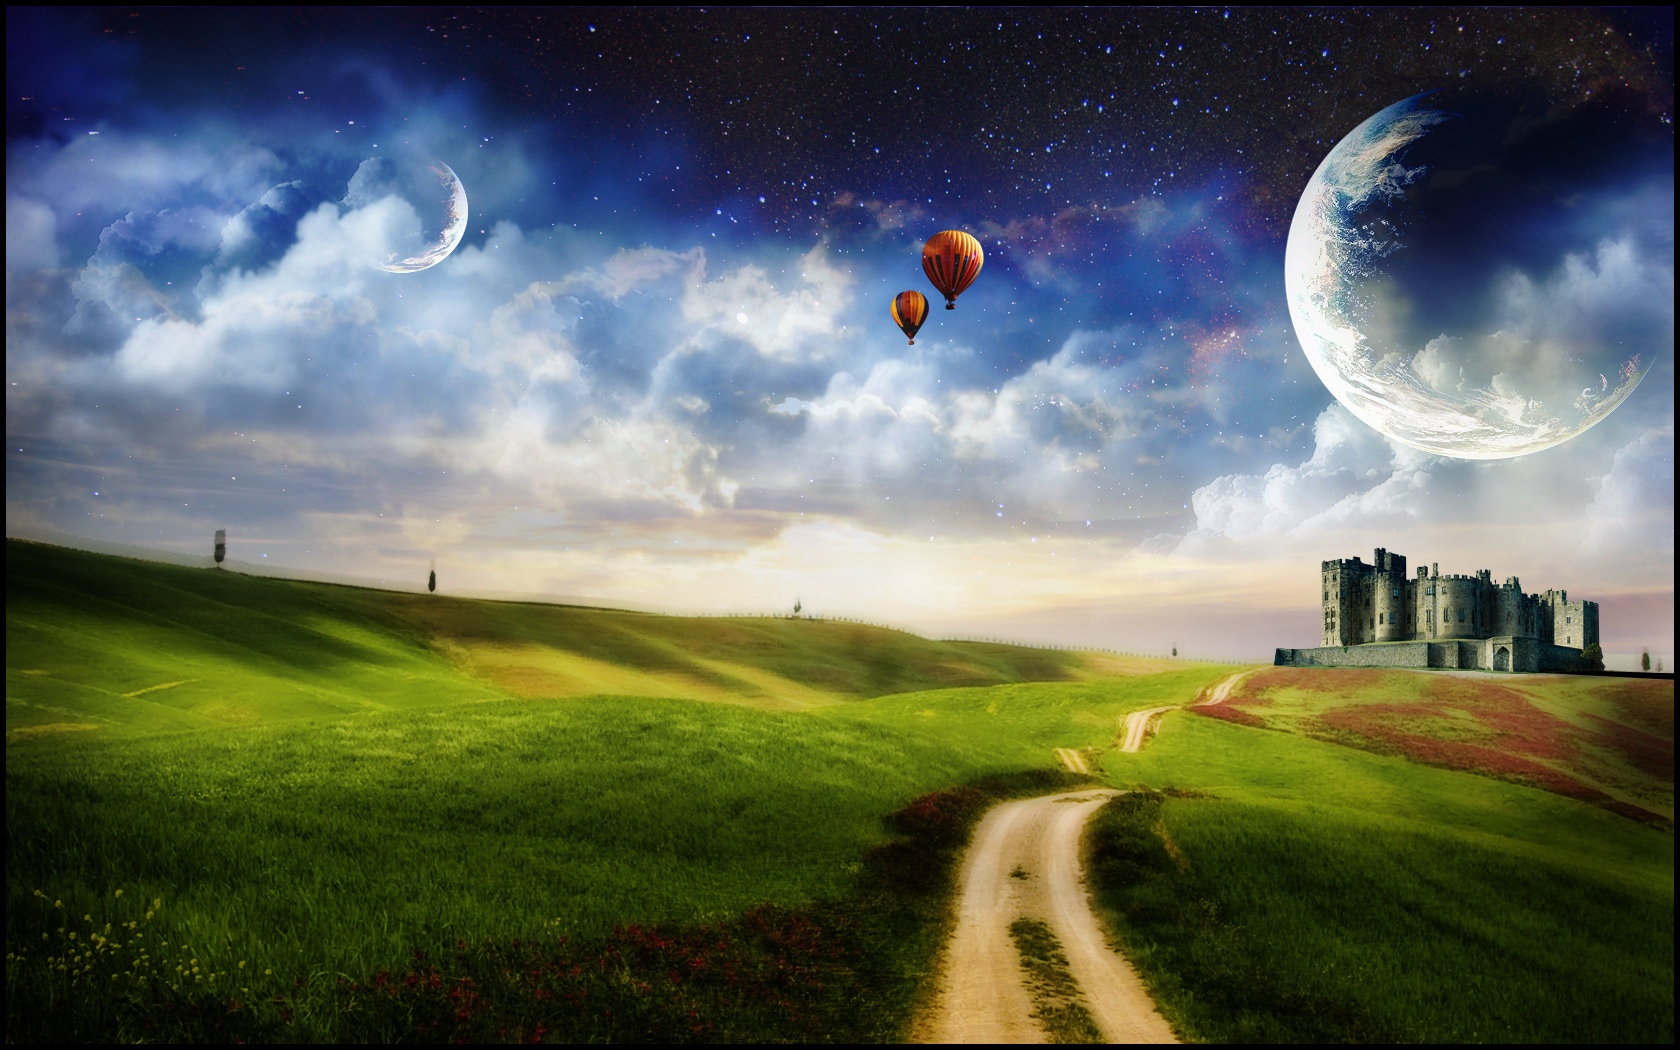 Dream like a kid   With PSD by TranceParadox on